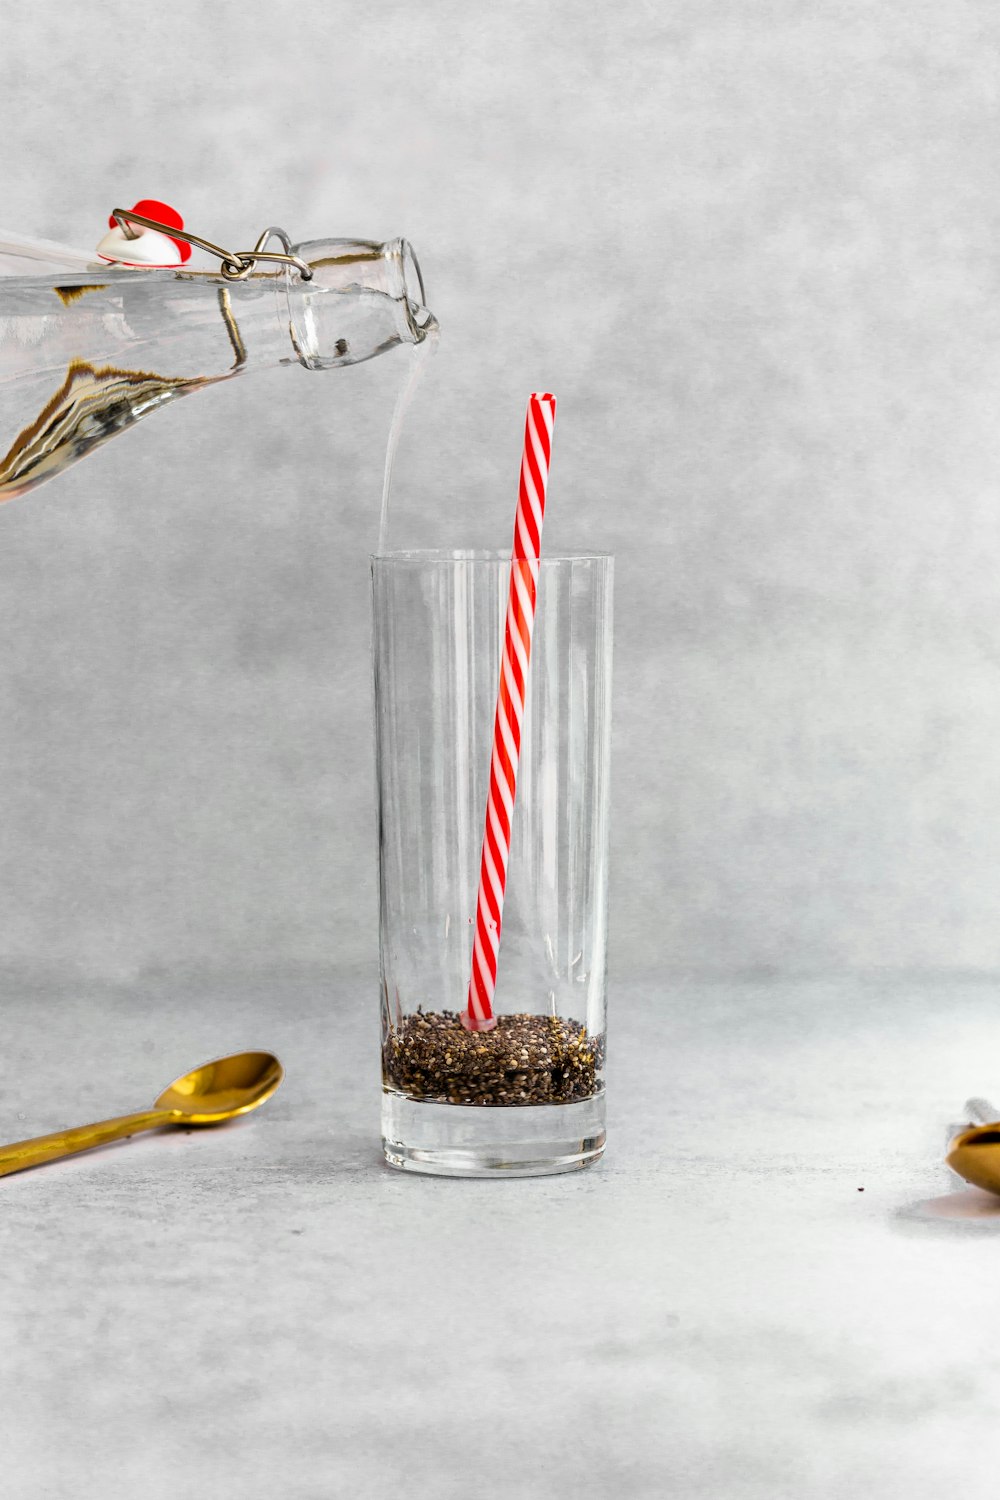 a red and white striped straw sticking out of a glass